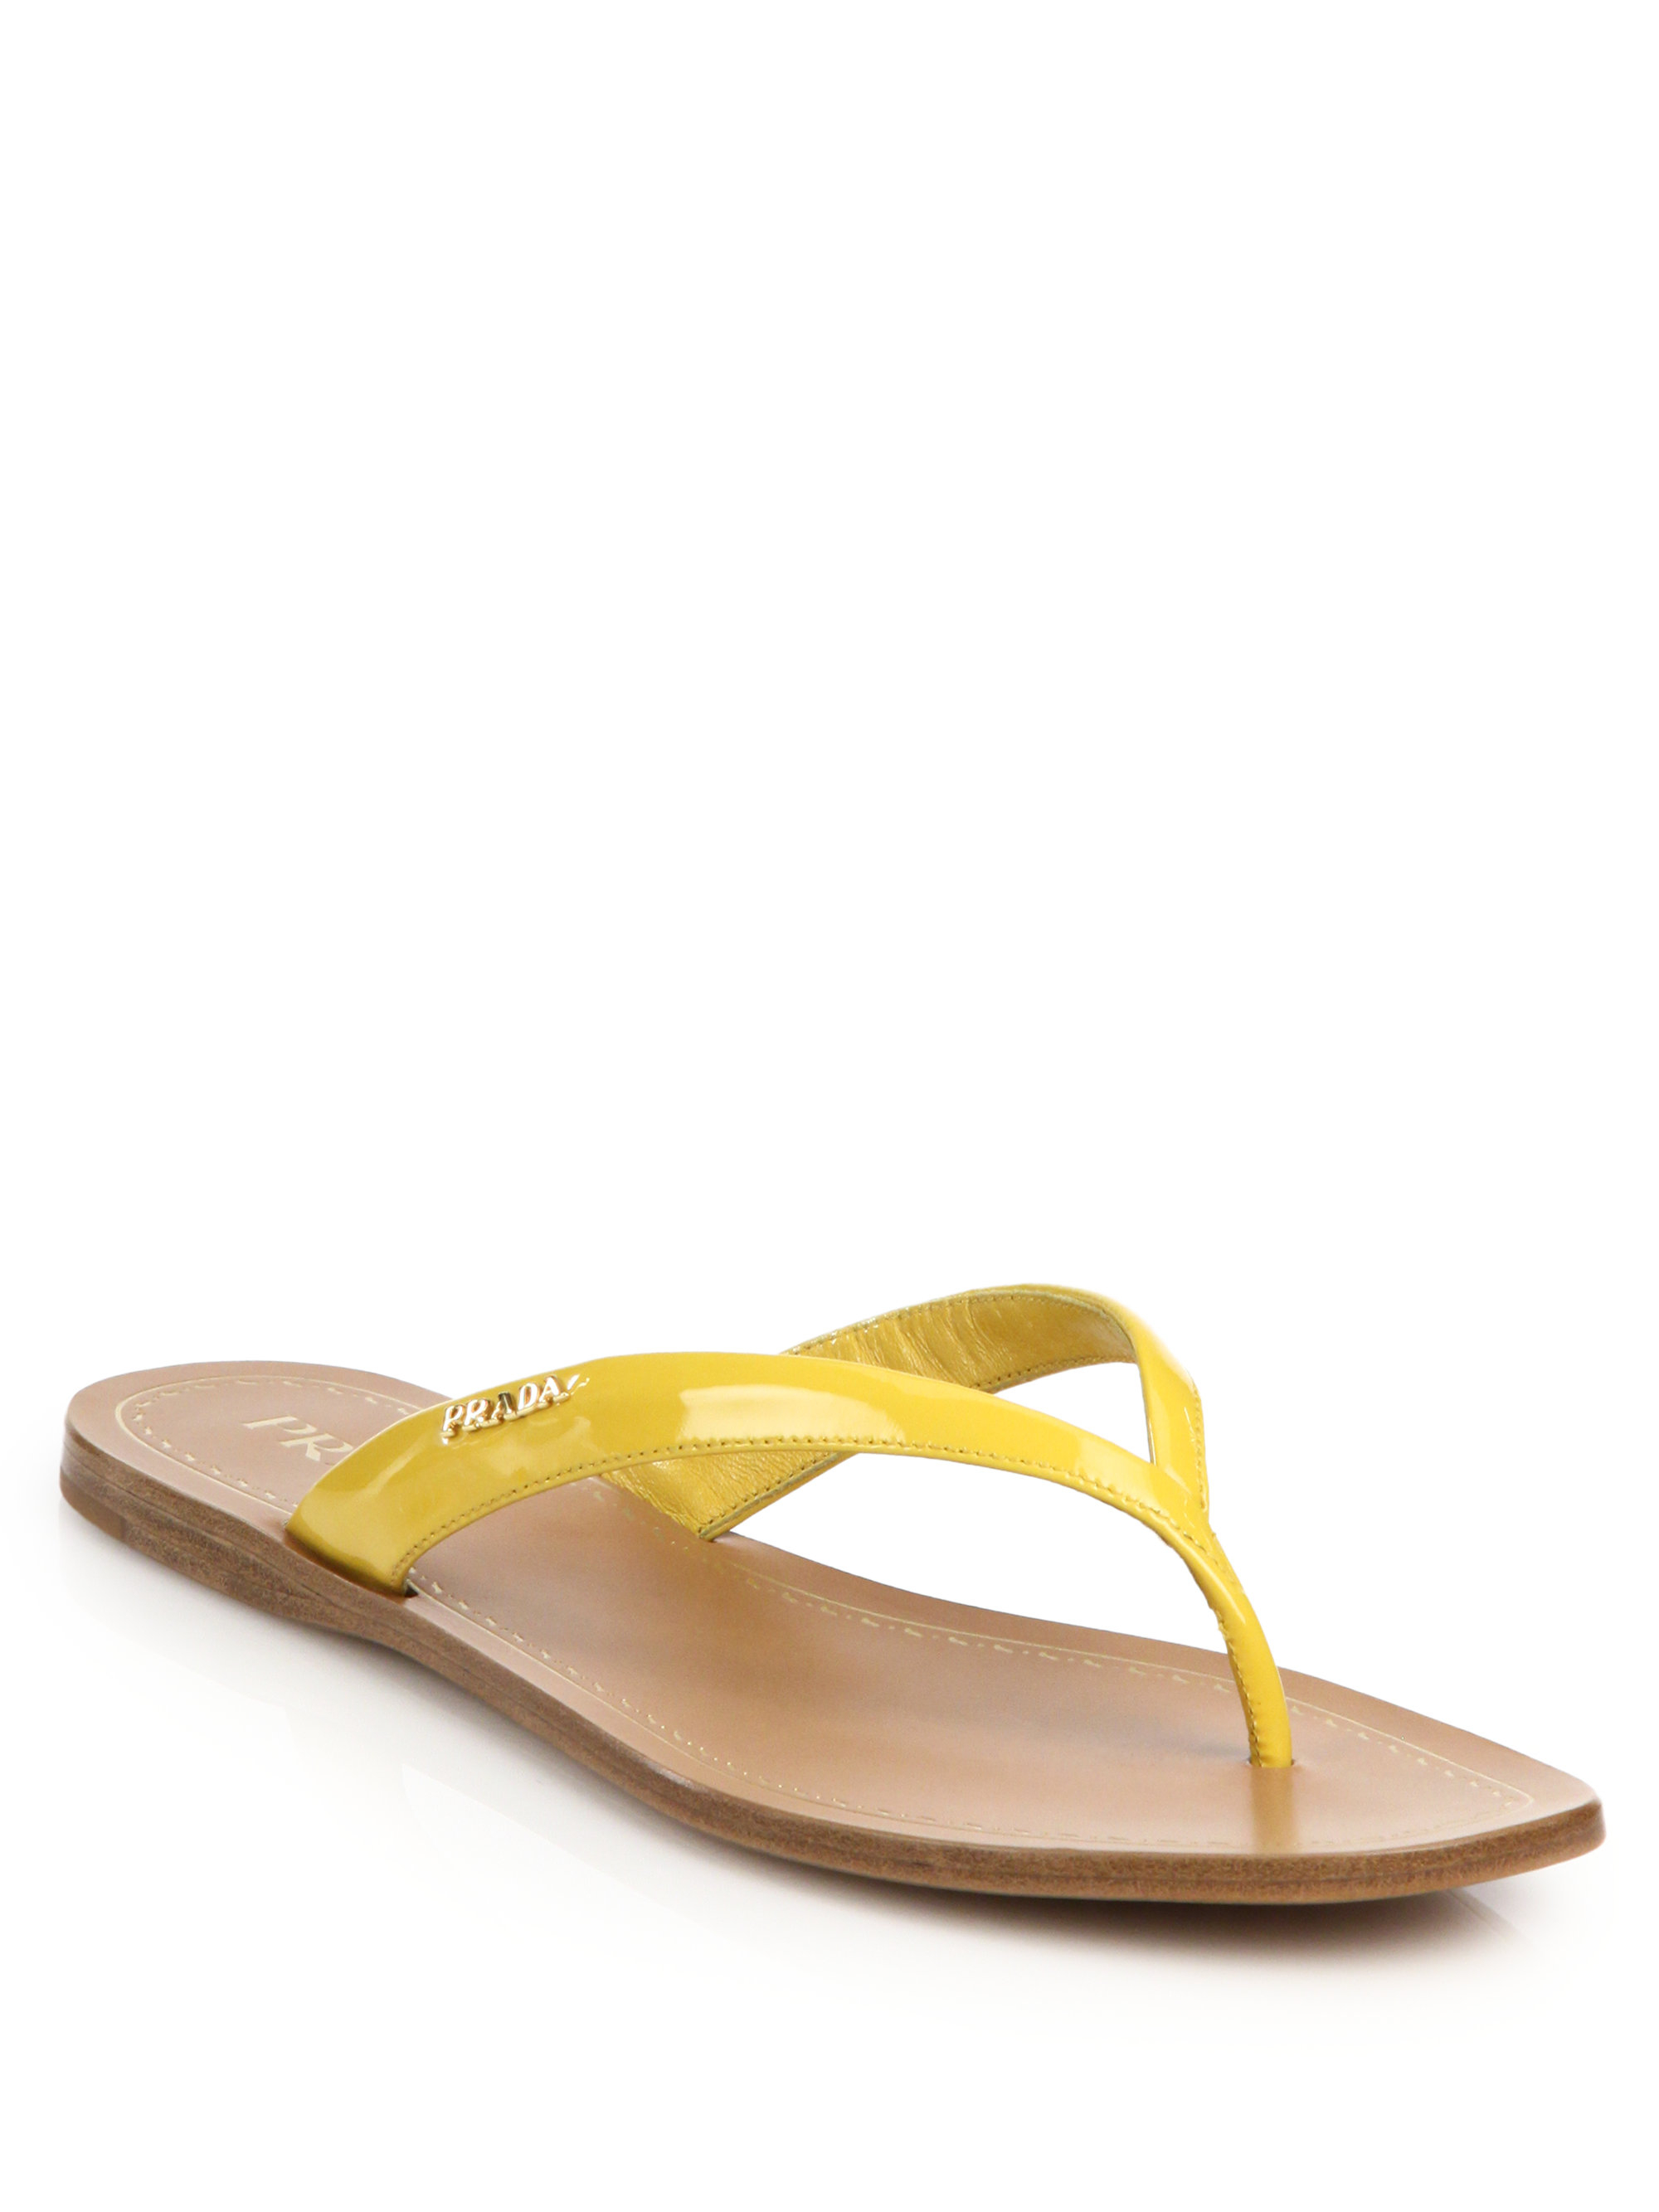 Prada Patent Leather Thong Sandals in Yellow